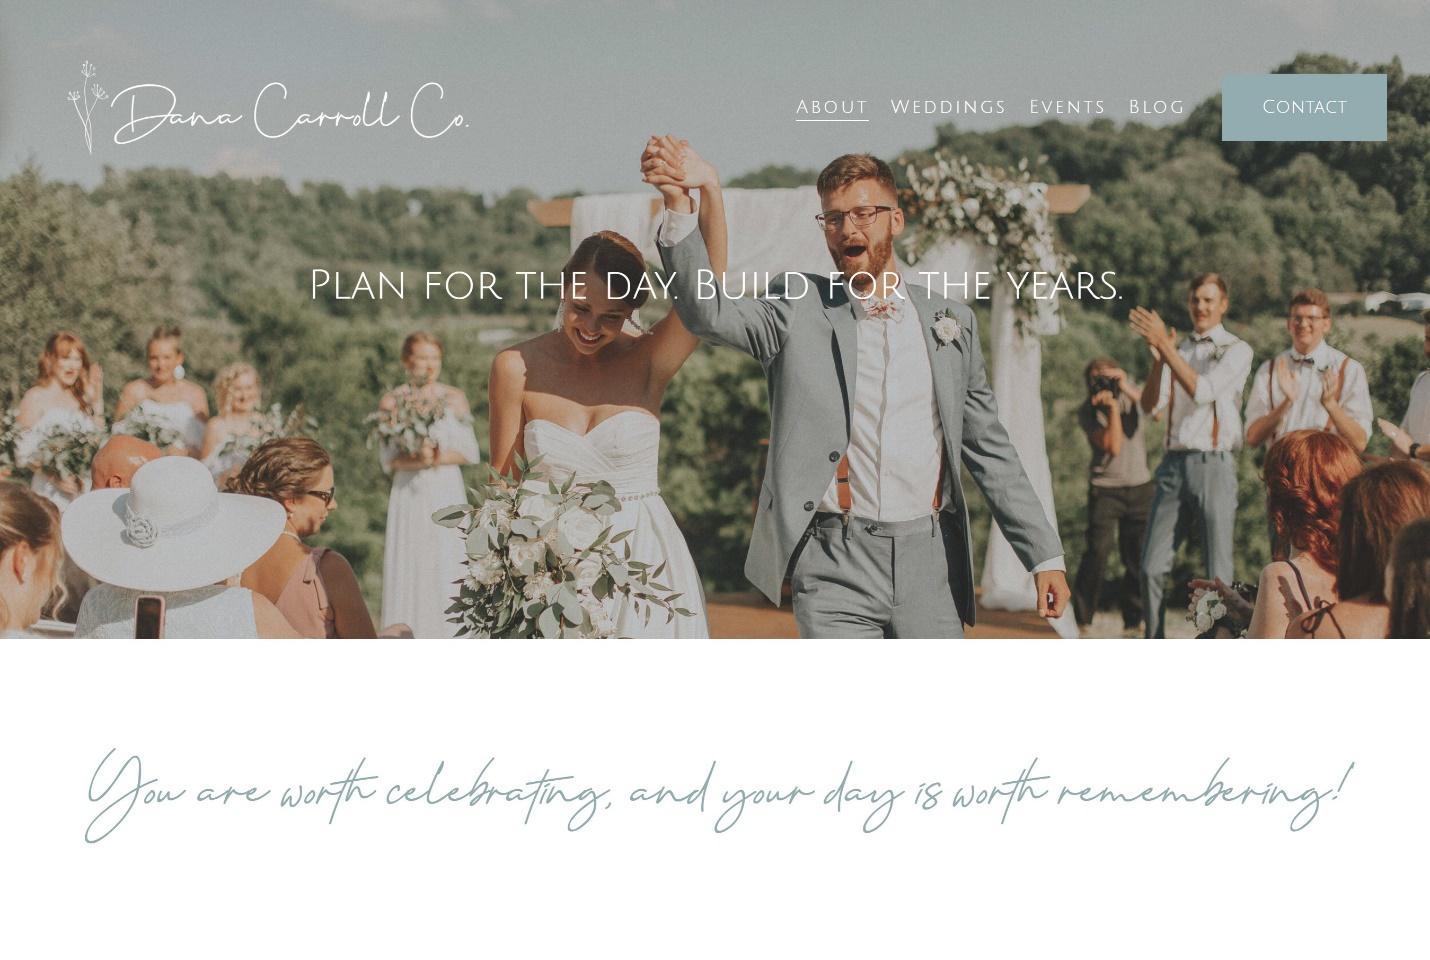 Dana Carroll Co. wedding planner About page.